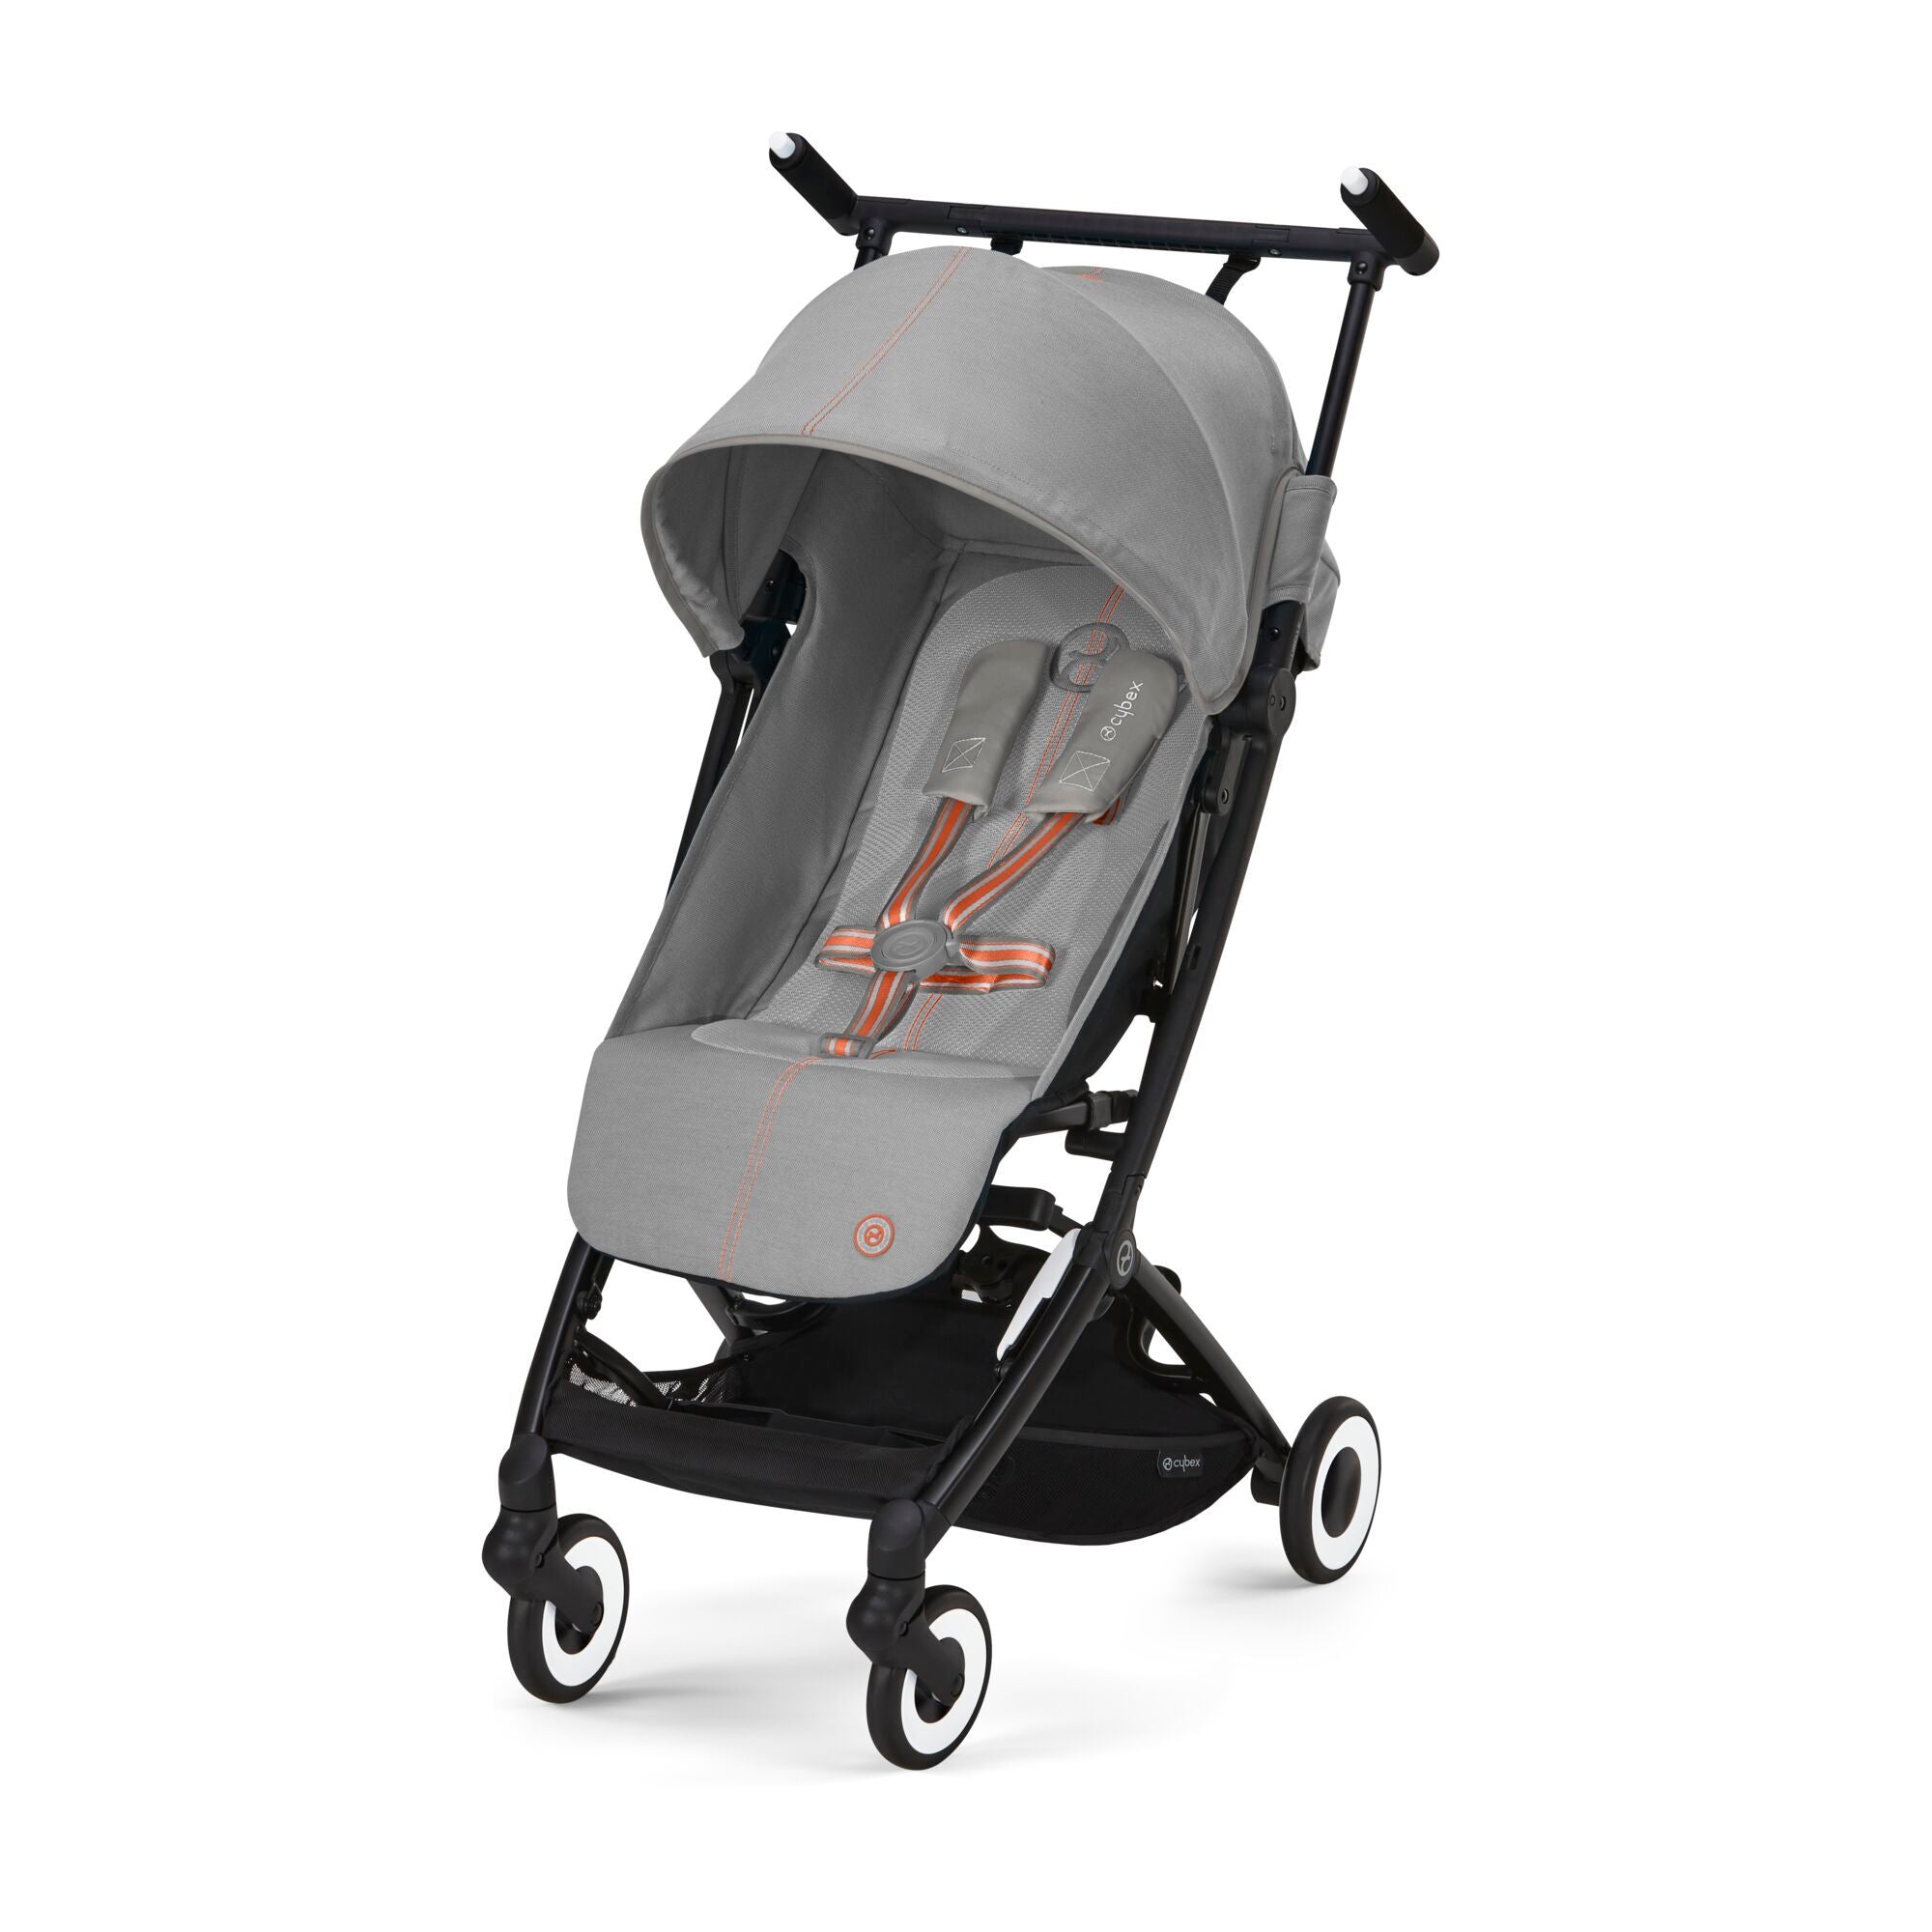 NEW IN BOX Inglesina Quid 2 Lightweight Travel Baby Infant Compact Stroller  Gray - Pasadena Music Academy – Music Lessons in Pasadena